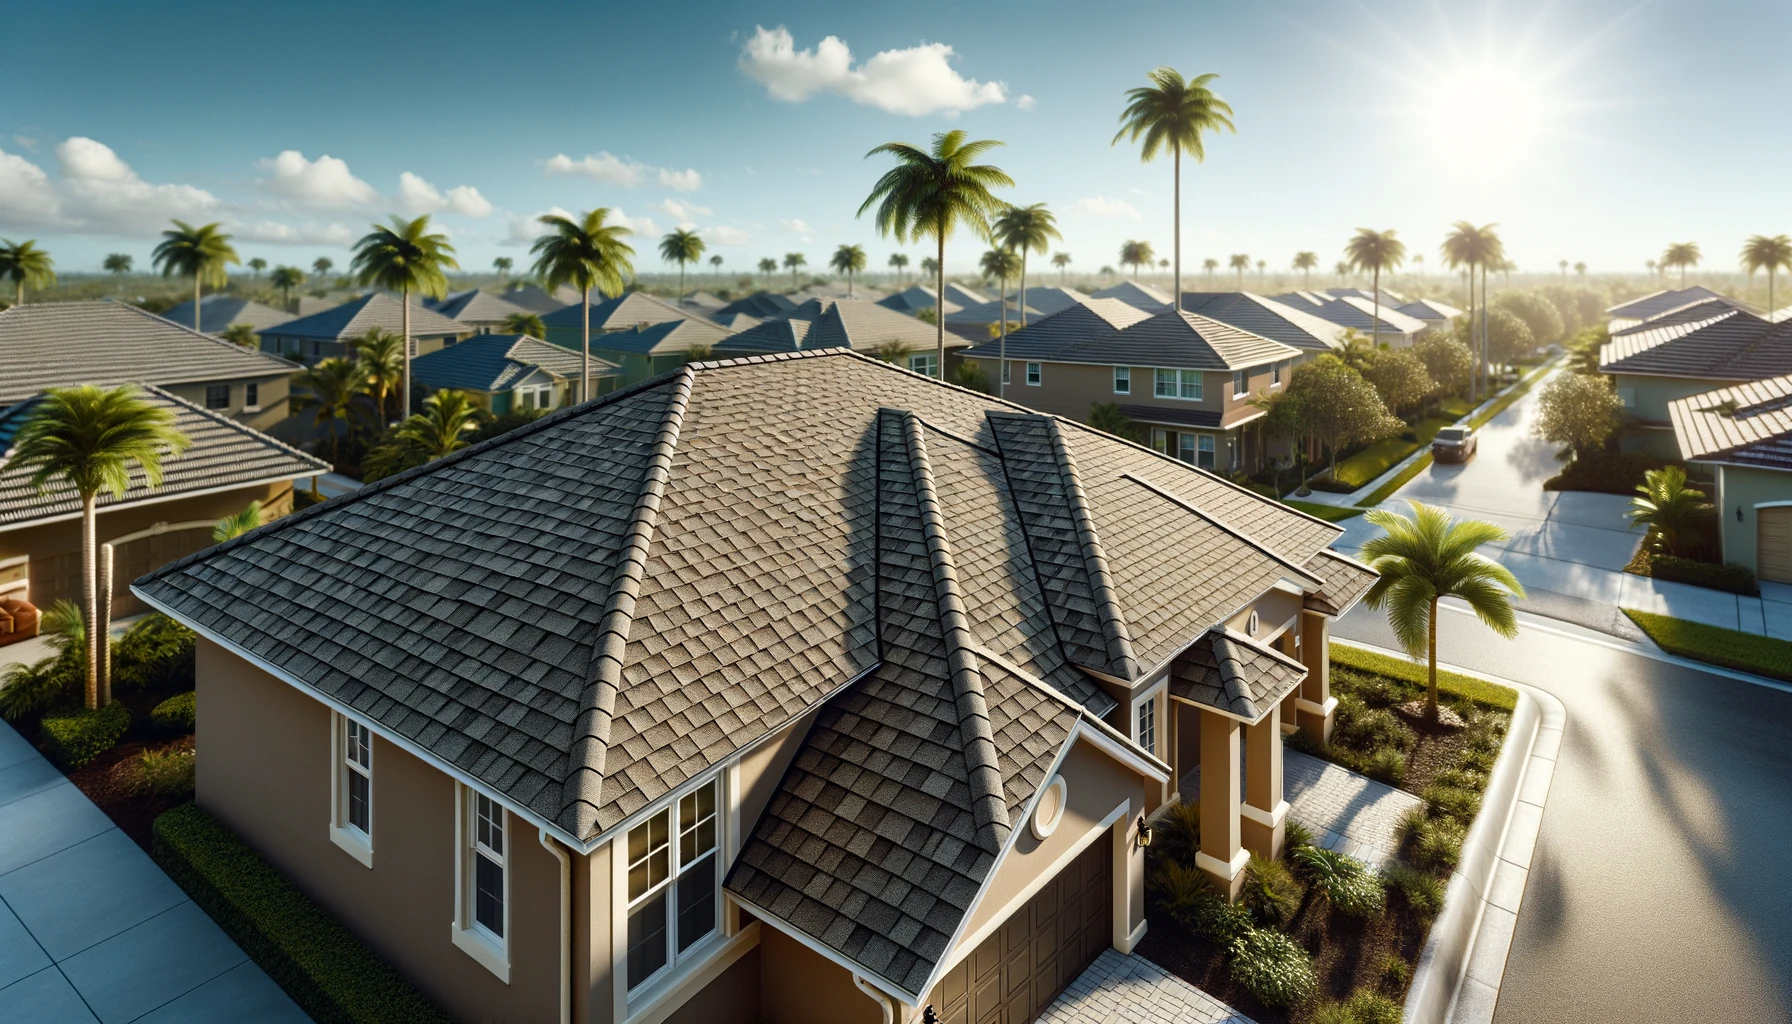 Best Roofing Shingles for Florida